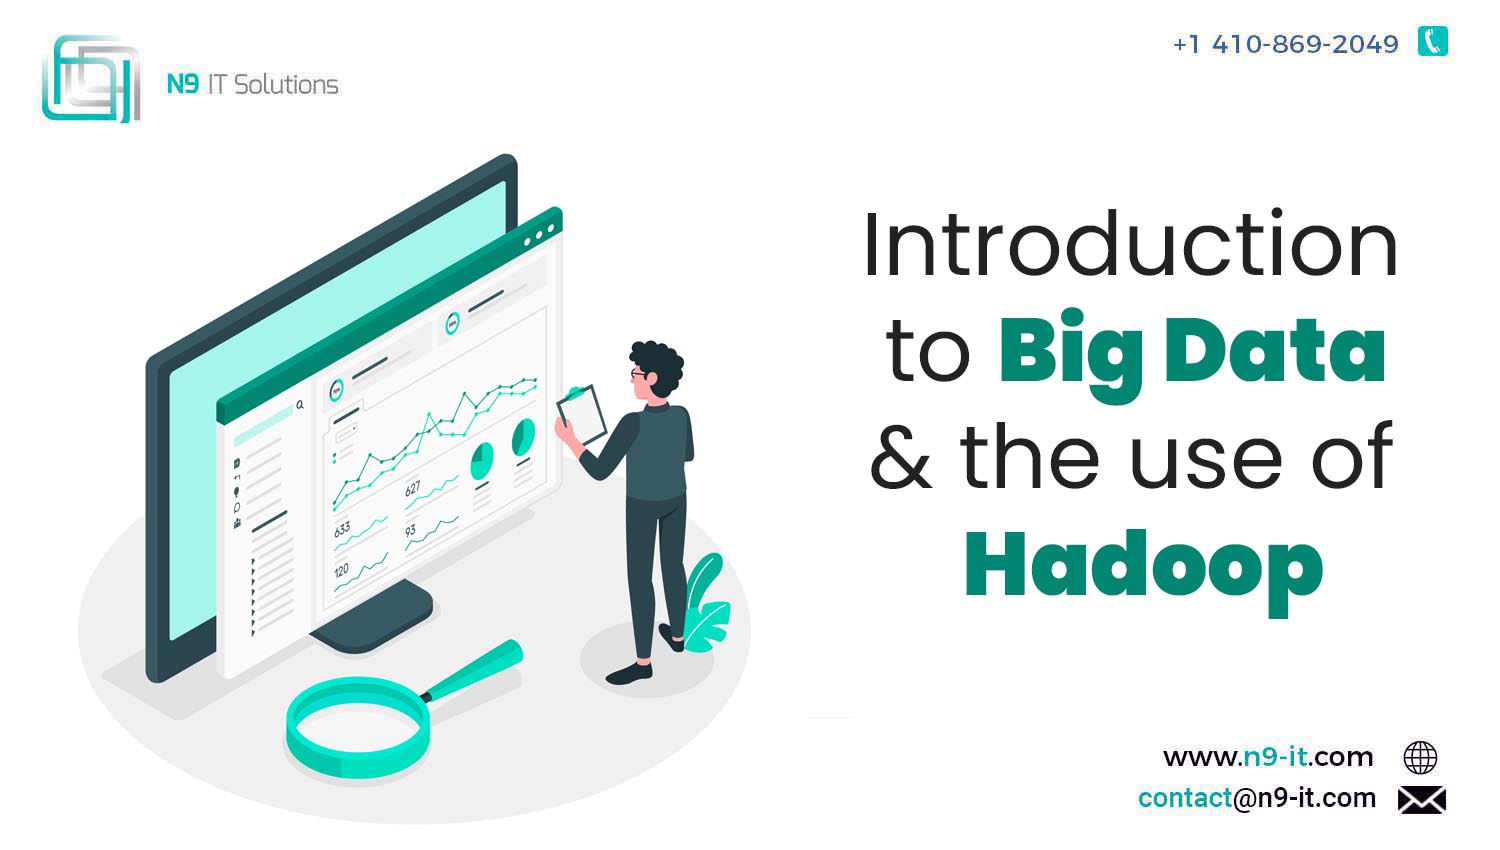 Introduction to Big Data & the use of Hadoop